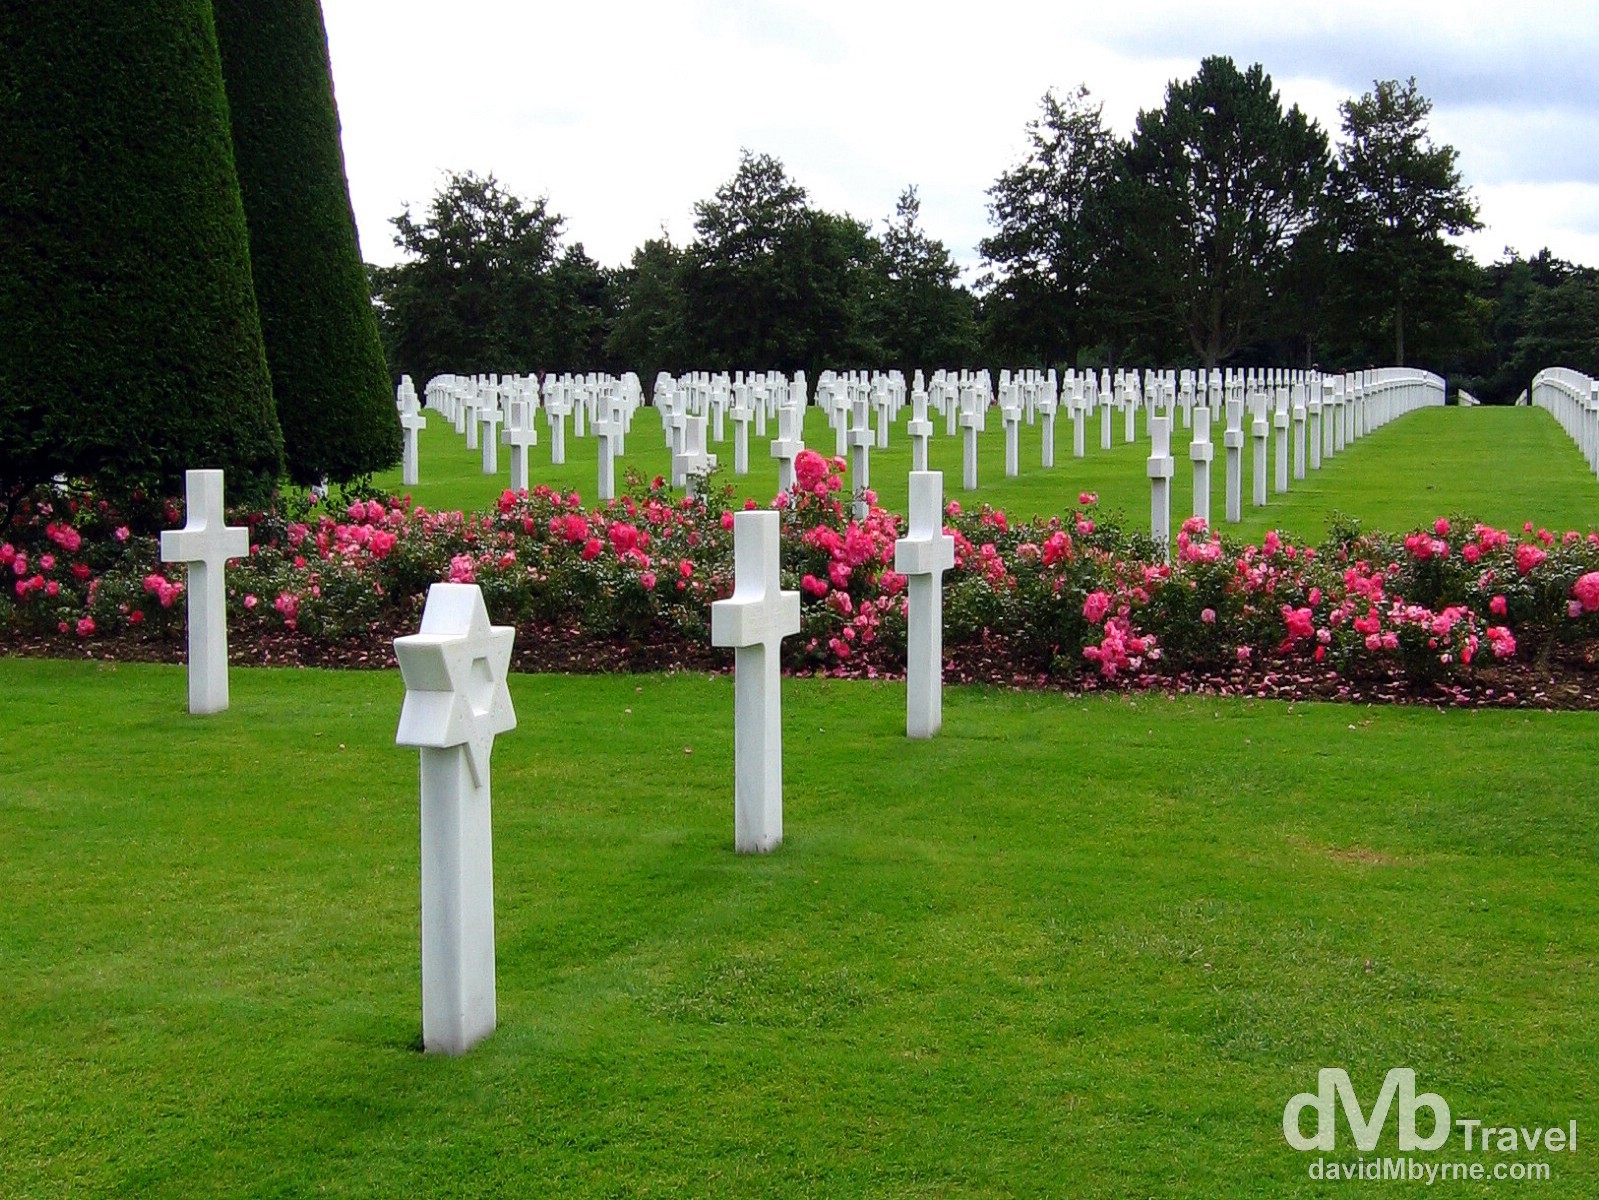 The American War Cemetery in Normandy, France, recognisable from the opening scenes of the 1998 WWII movie 'Saving Private Ryan', overlooks Omaha beach, the D-Day beach stormed by the Americans and the beach that saw the most intense fighting and accounted for most of the D-Day causalities. This sombre place is the final resting spot for just under 10,000 soldiers who died in the overall battle of Normandy. They are buried under solid white marble crosses in orderly rows set among the most impeccably manicured lawns I've ever seen. The site is 720 acres in size, land that was, at the end of the war, given to the Americans by the French government in perpetuity. American War Cemetery, Colleville sur mer, Normandy, France. August 16th 2007.